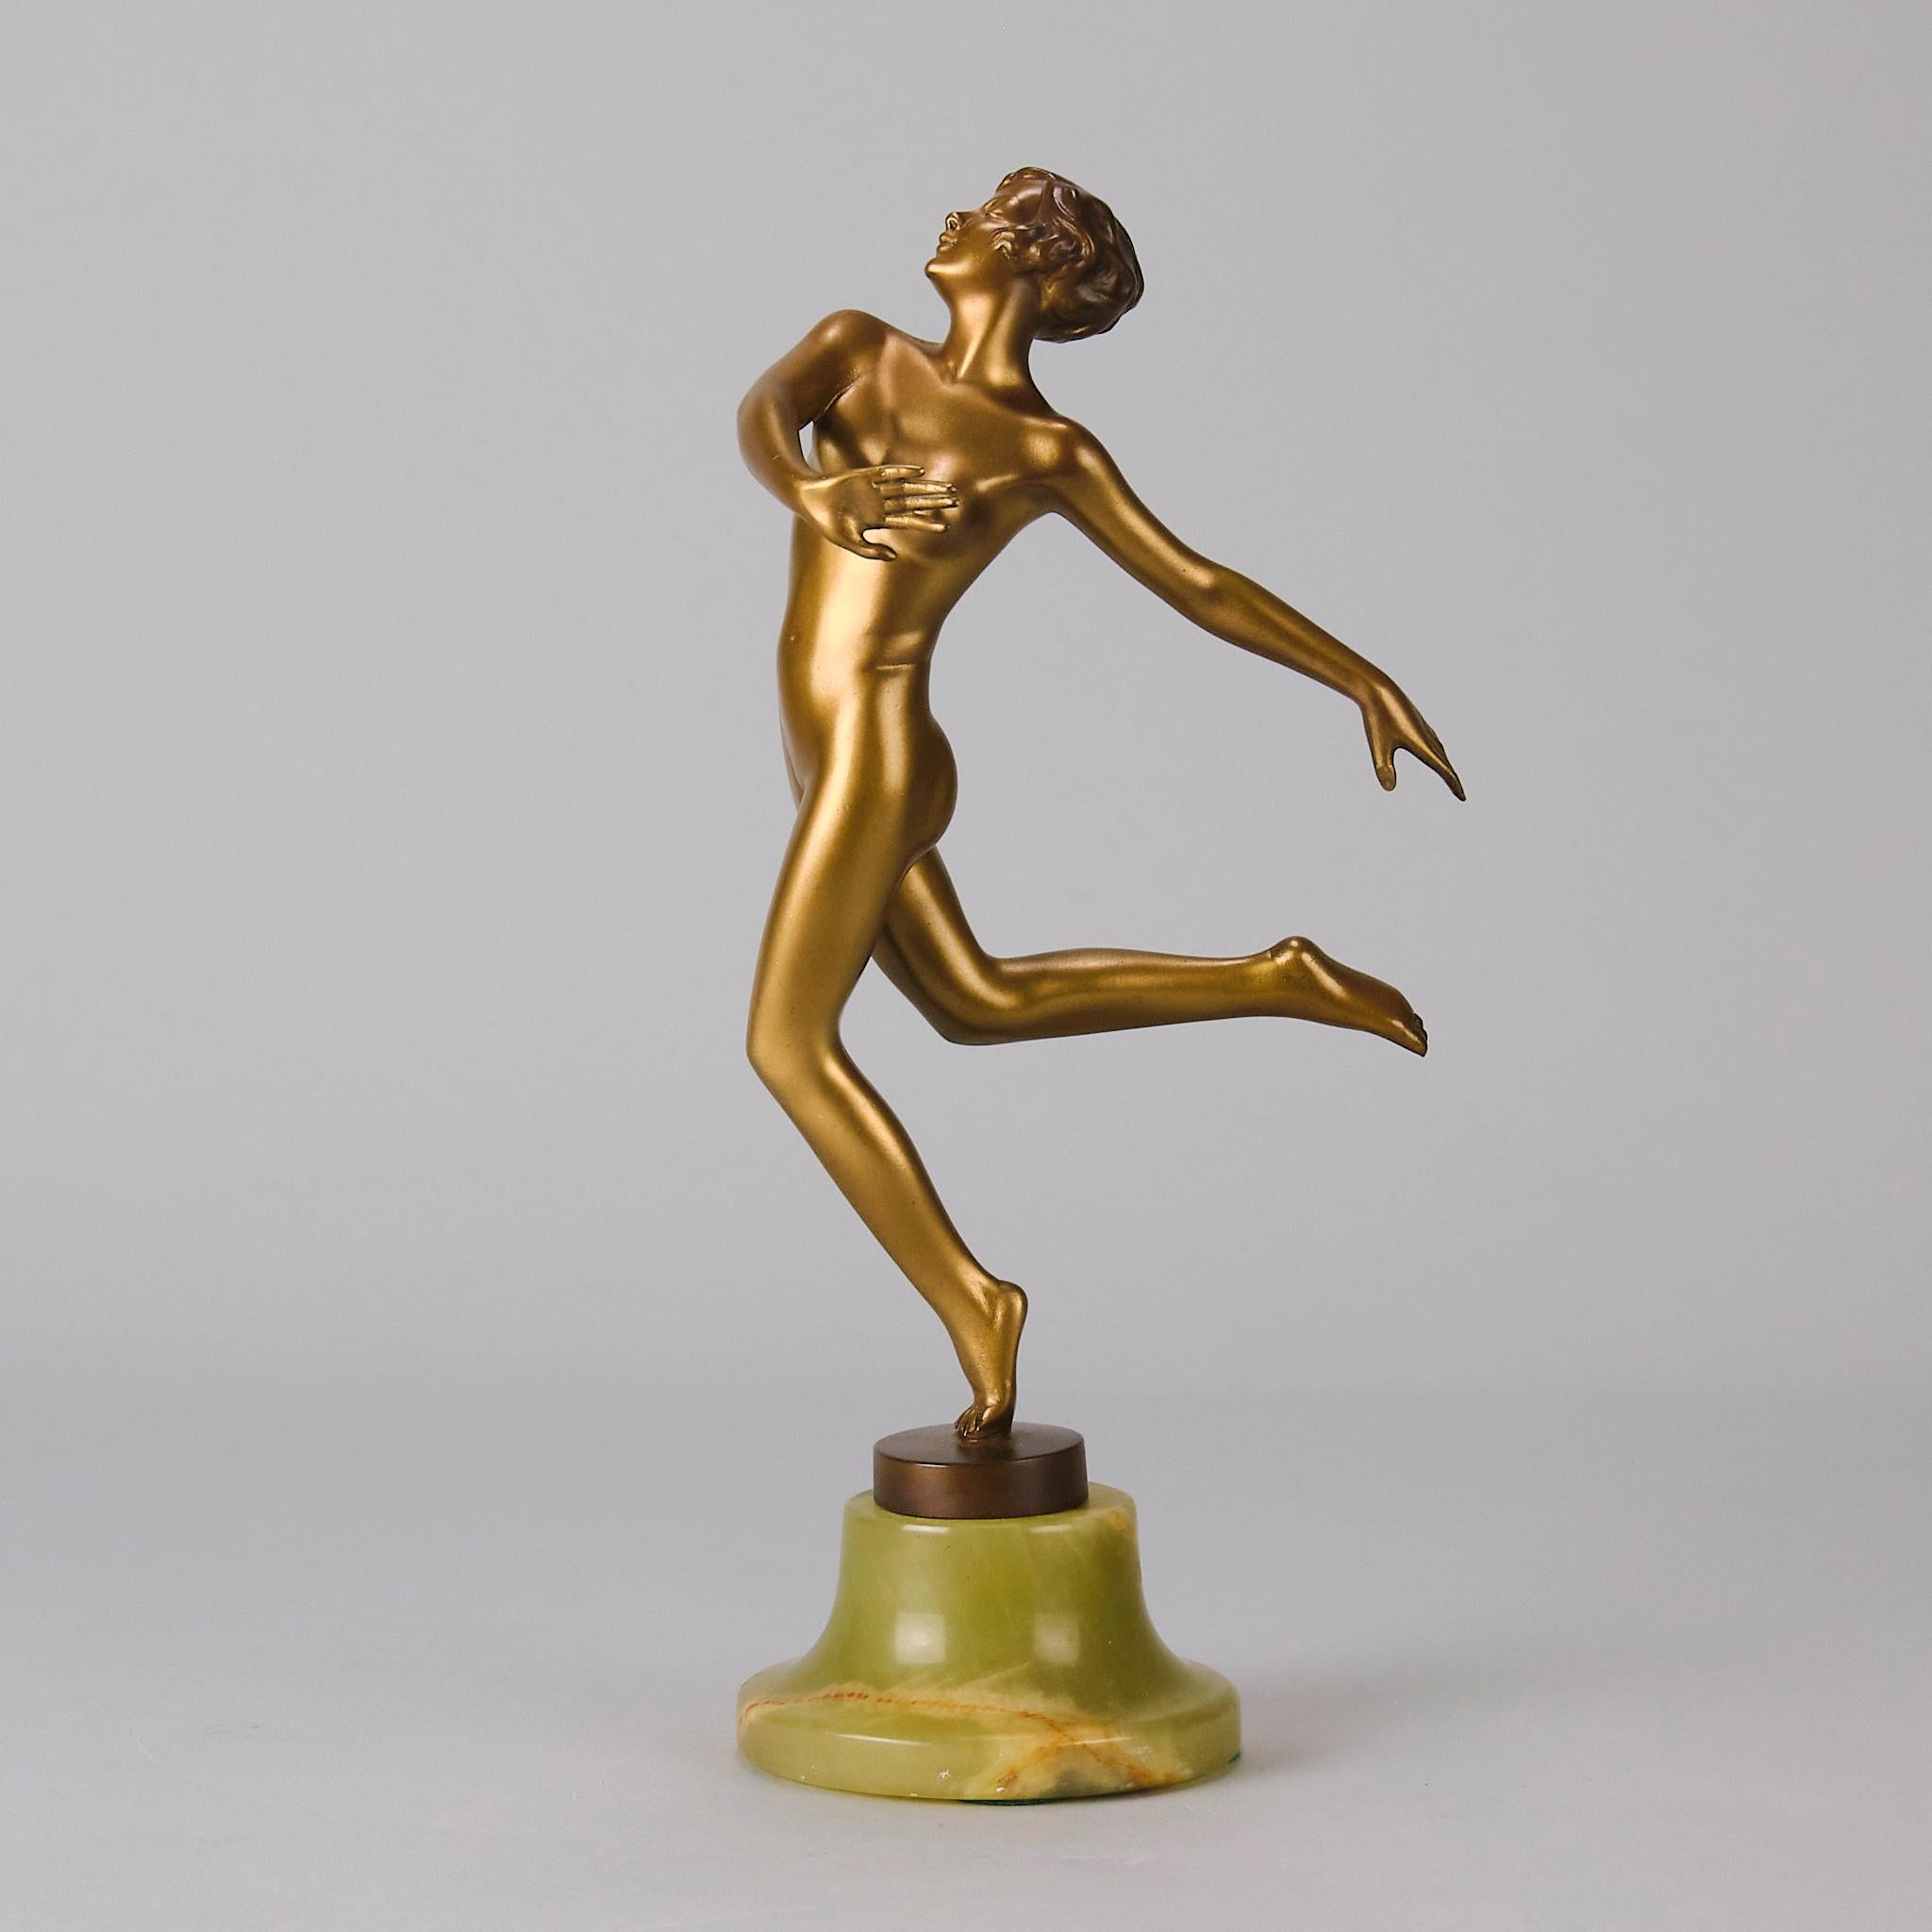 A fabulous early 20th Century Art Deco cold painted bronze figure of a naked dancer in an elegant flowing pose, exhibiting excellent colour and fine hand finished detail, raised on a green onyx base and signed Lorenzl
Additional